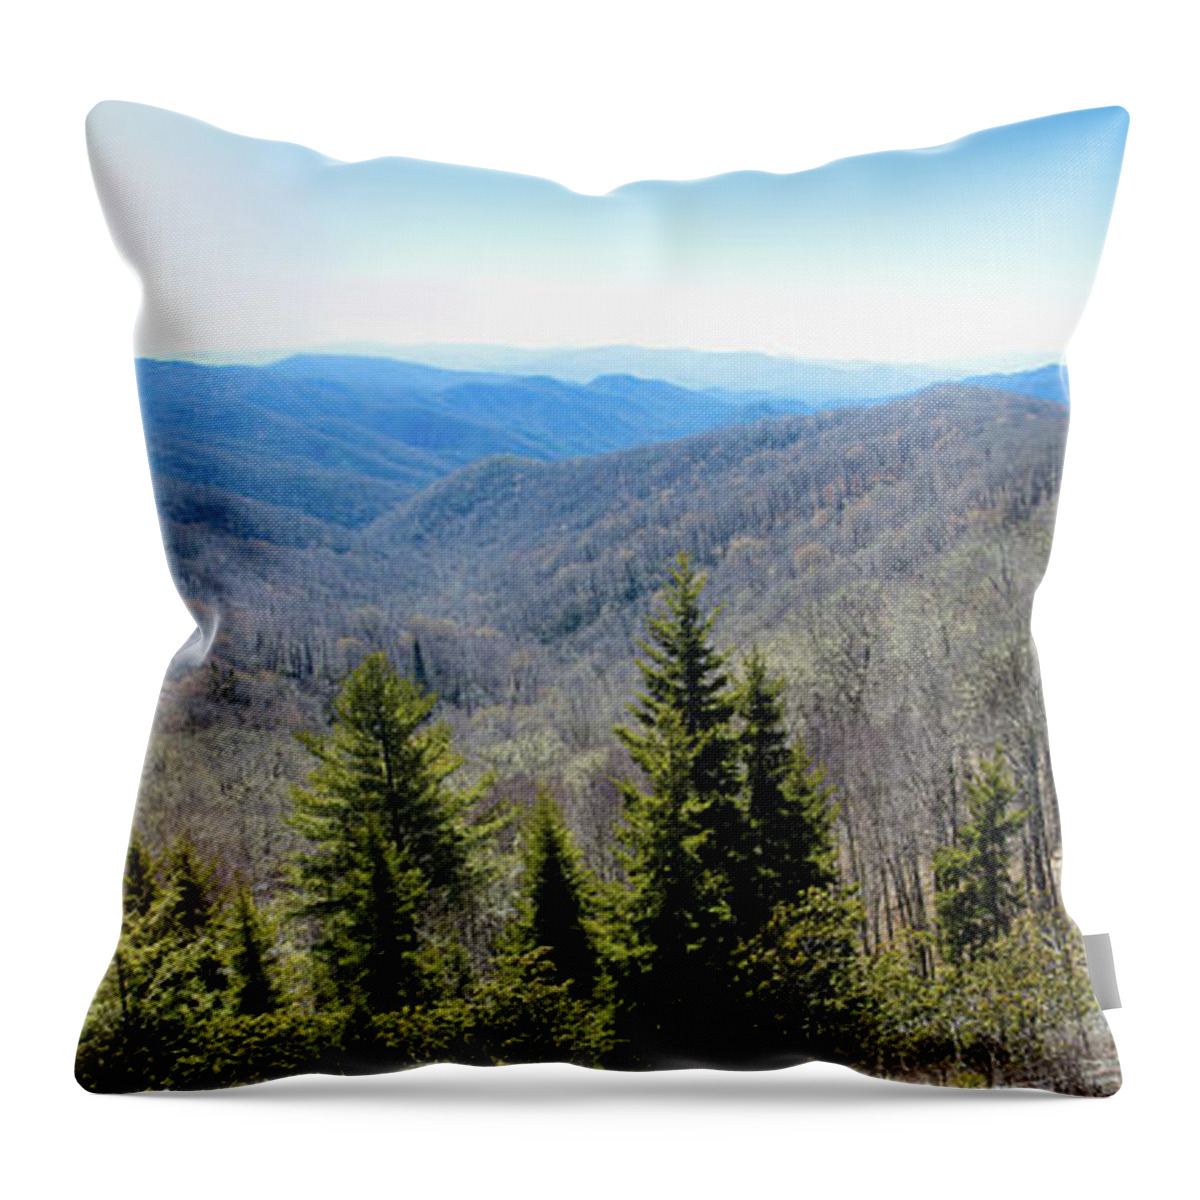 Smokey Mountains Throw Pillow featuring the photograph Smokey Mountains Pan by Lindsey Weimer